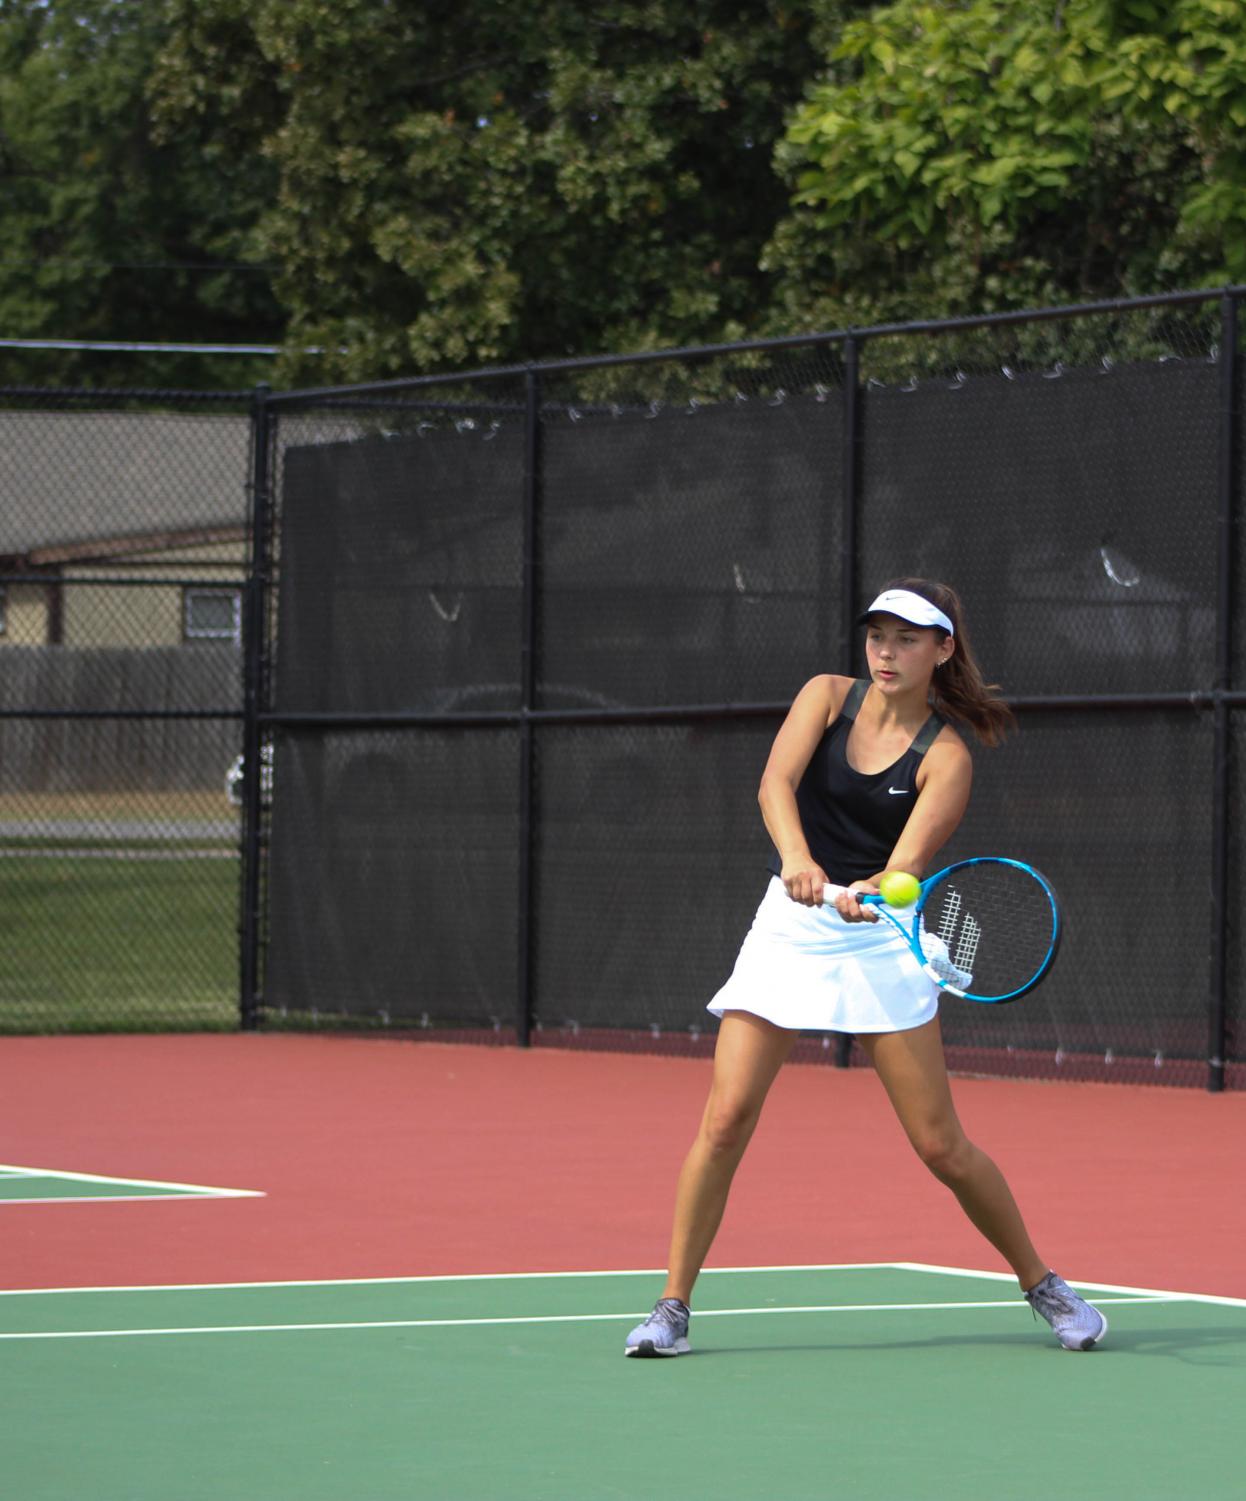 Girls+Varsity+Tennis+at+Kossover+Tennis+Center+9%2F22+%28Photos+by+Kiley+Hale%29